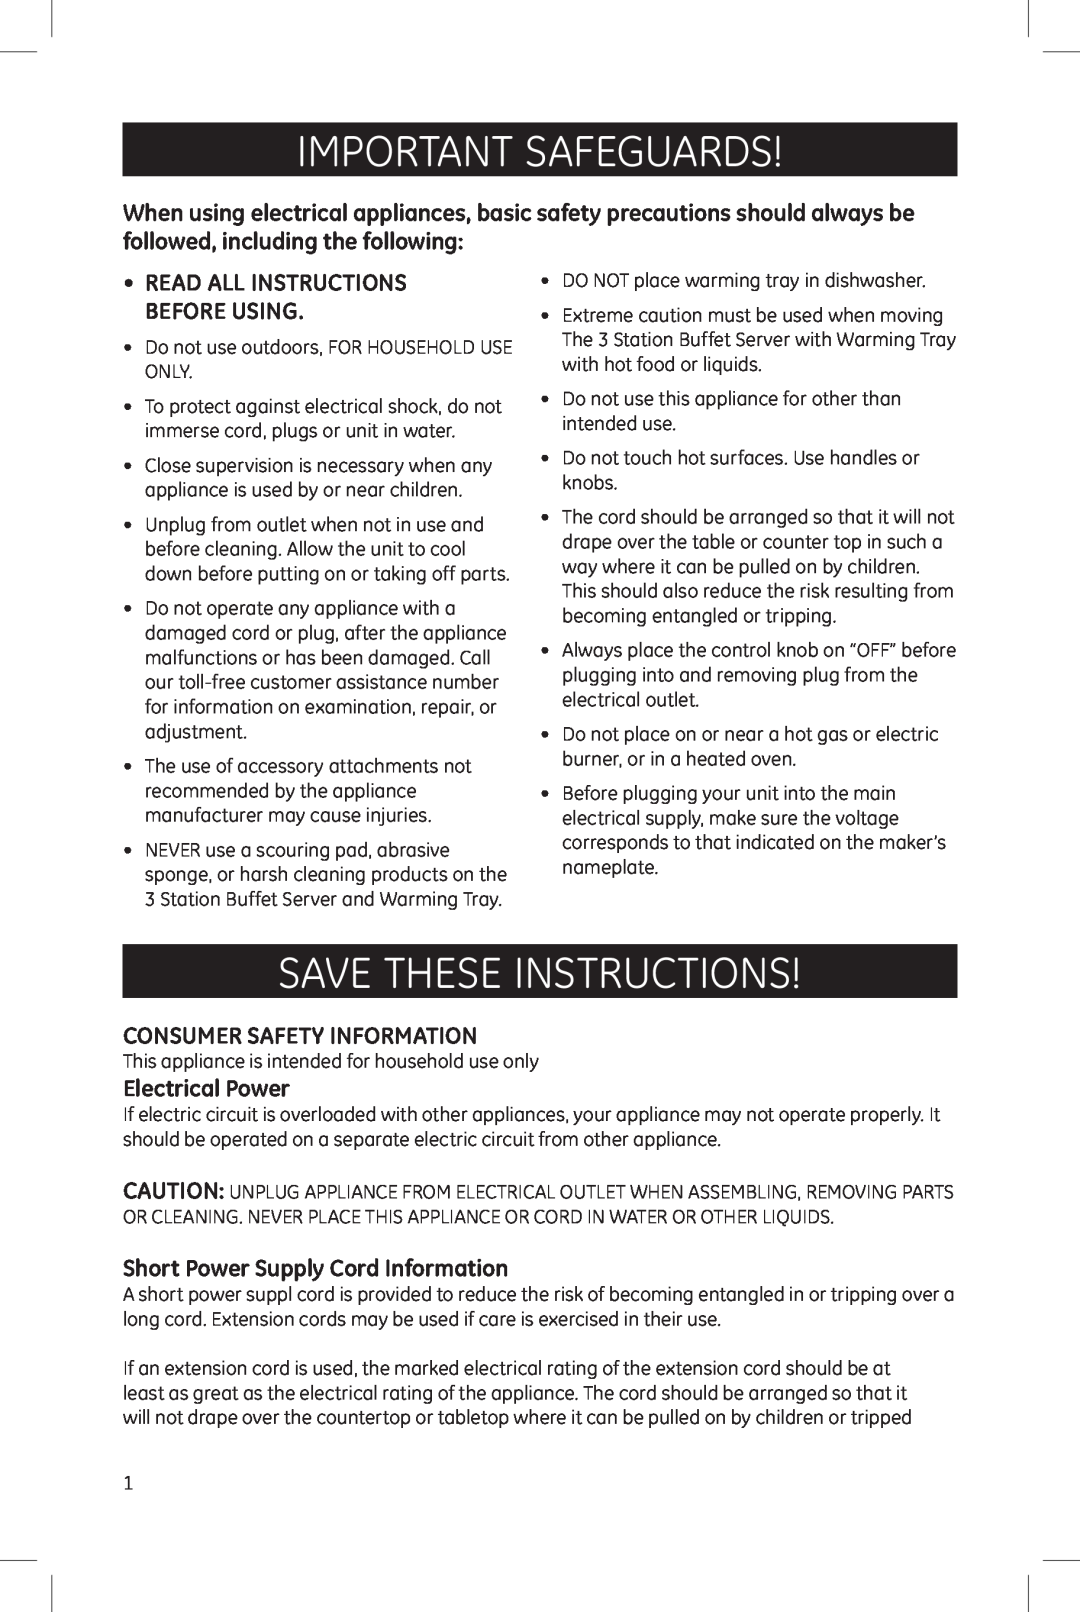 GE 169158 manual Important Safeguards, Save These Instructions, Consumer Safety Information, Electrical Power 